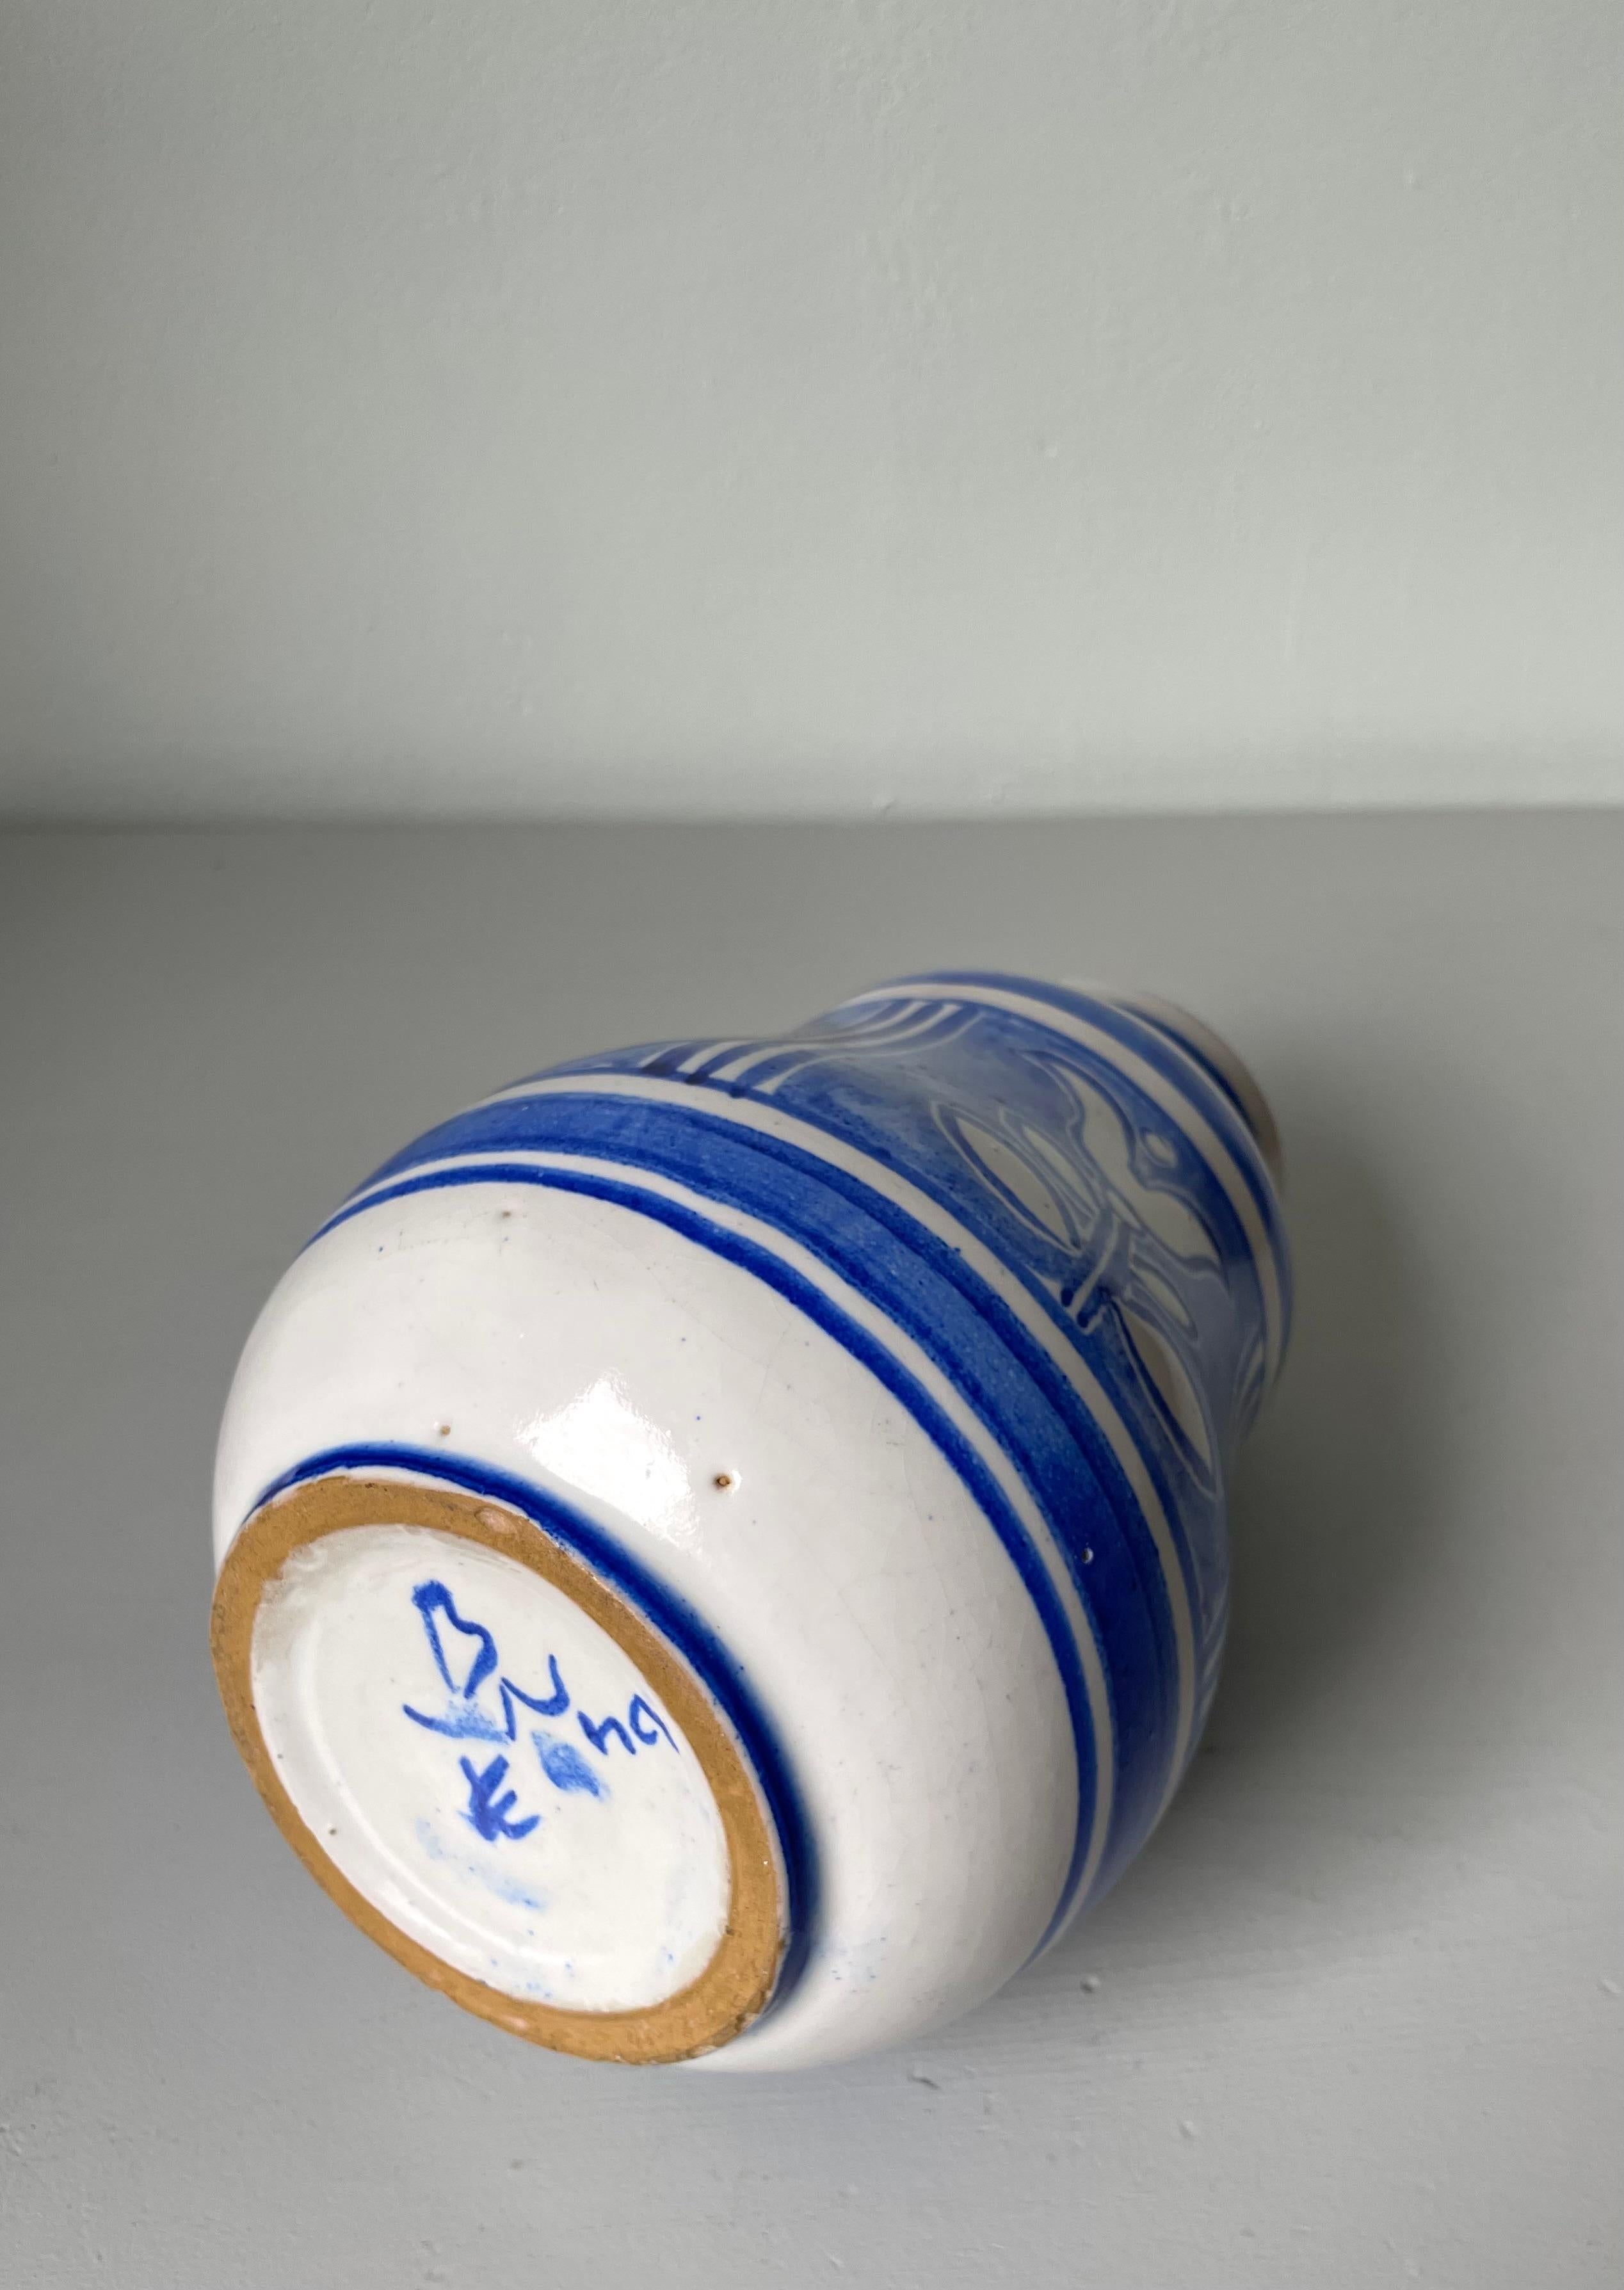 Nordic White Hand-Decorated Blue Floral Ceramic Vase, 1950s For Sale 7